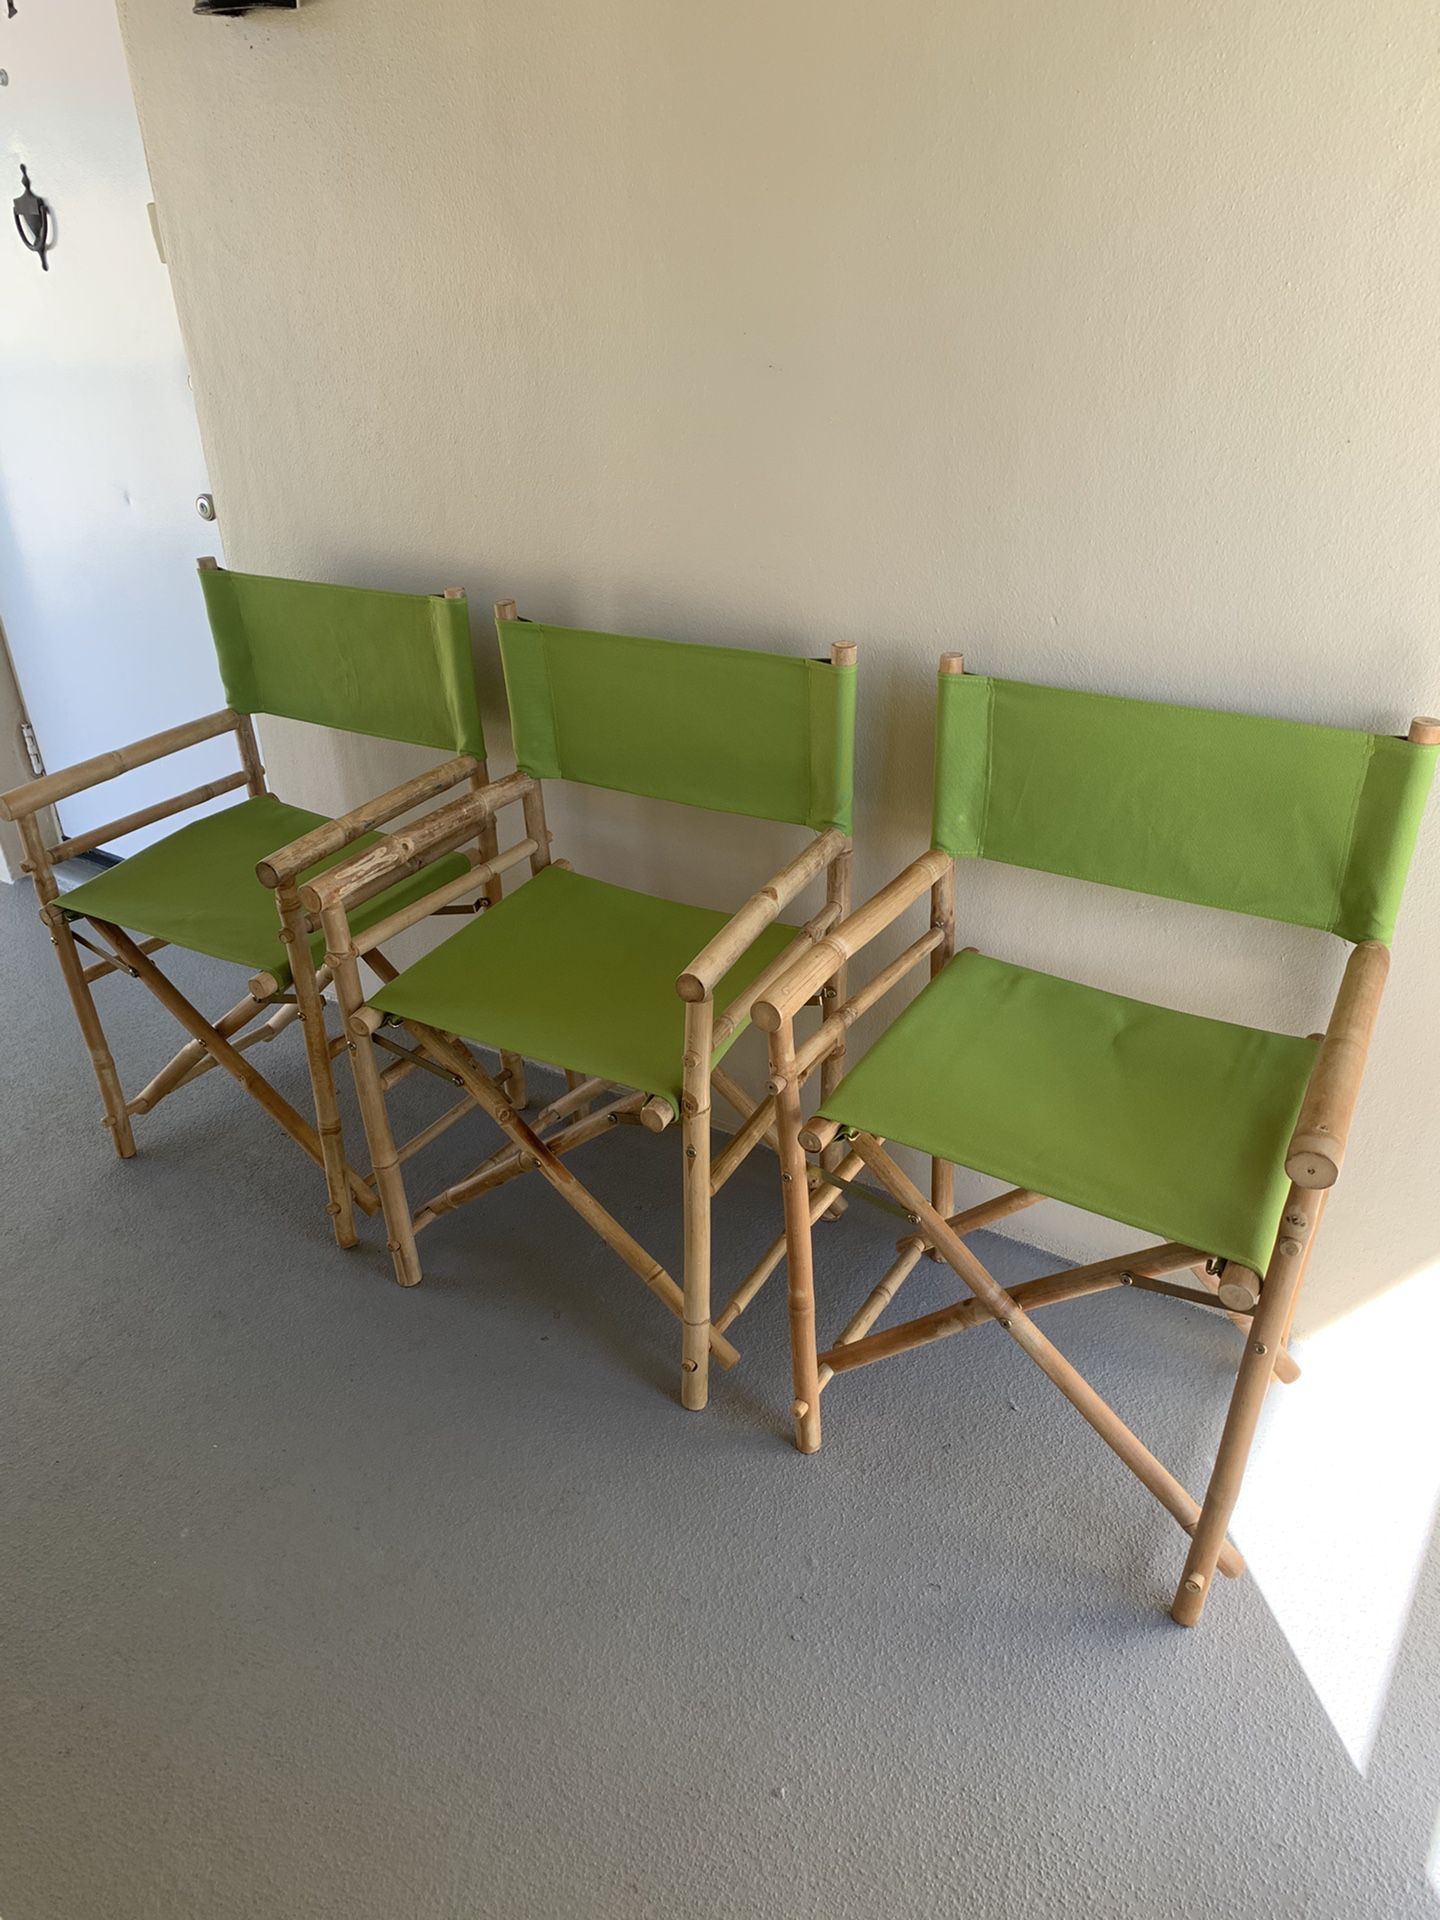 3 All bamboo directors chair